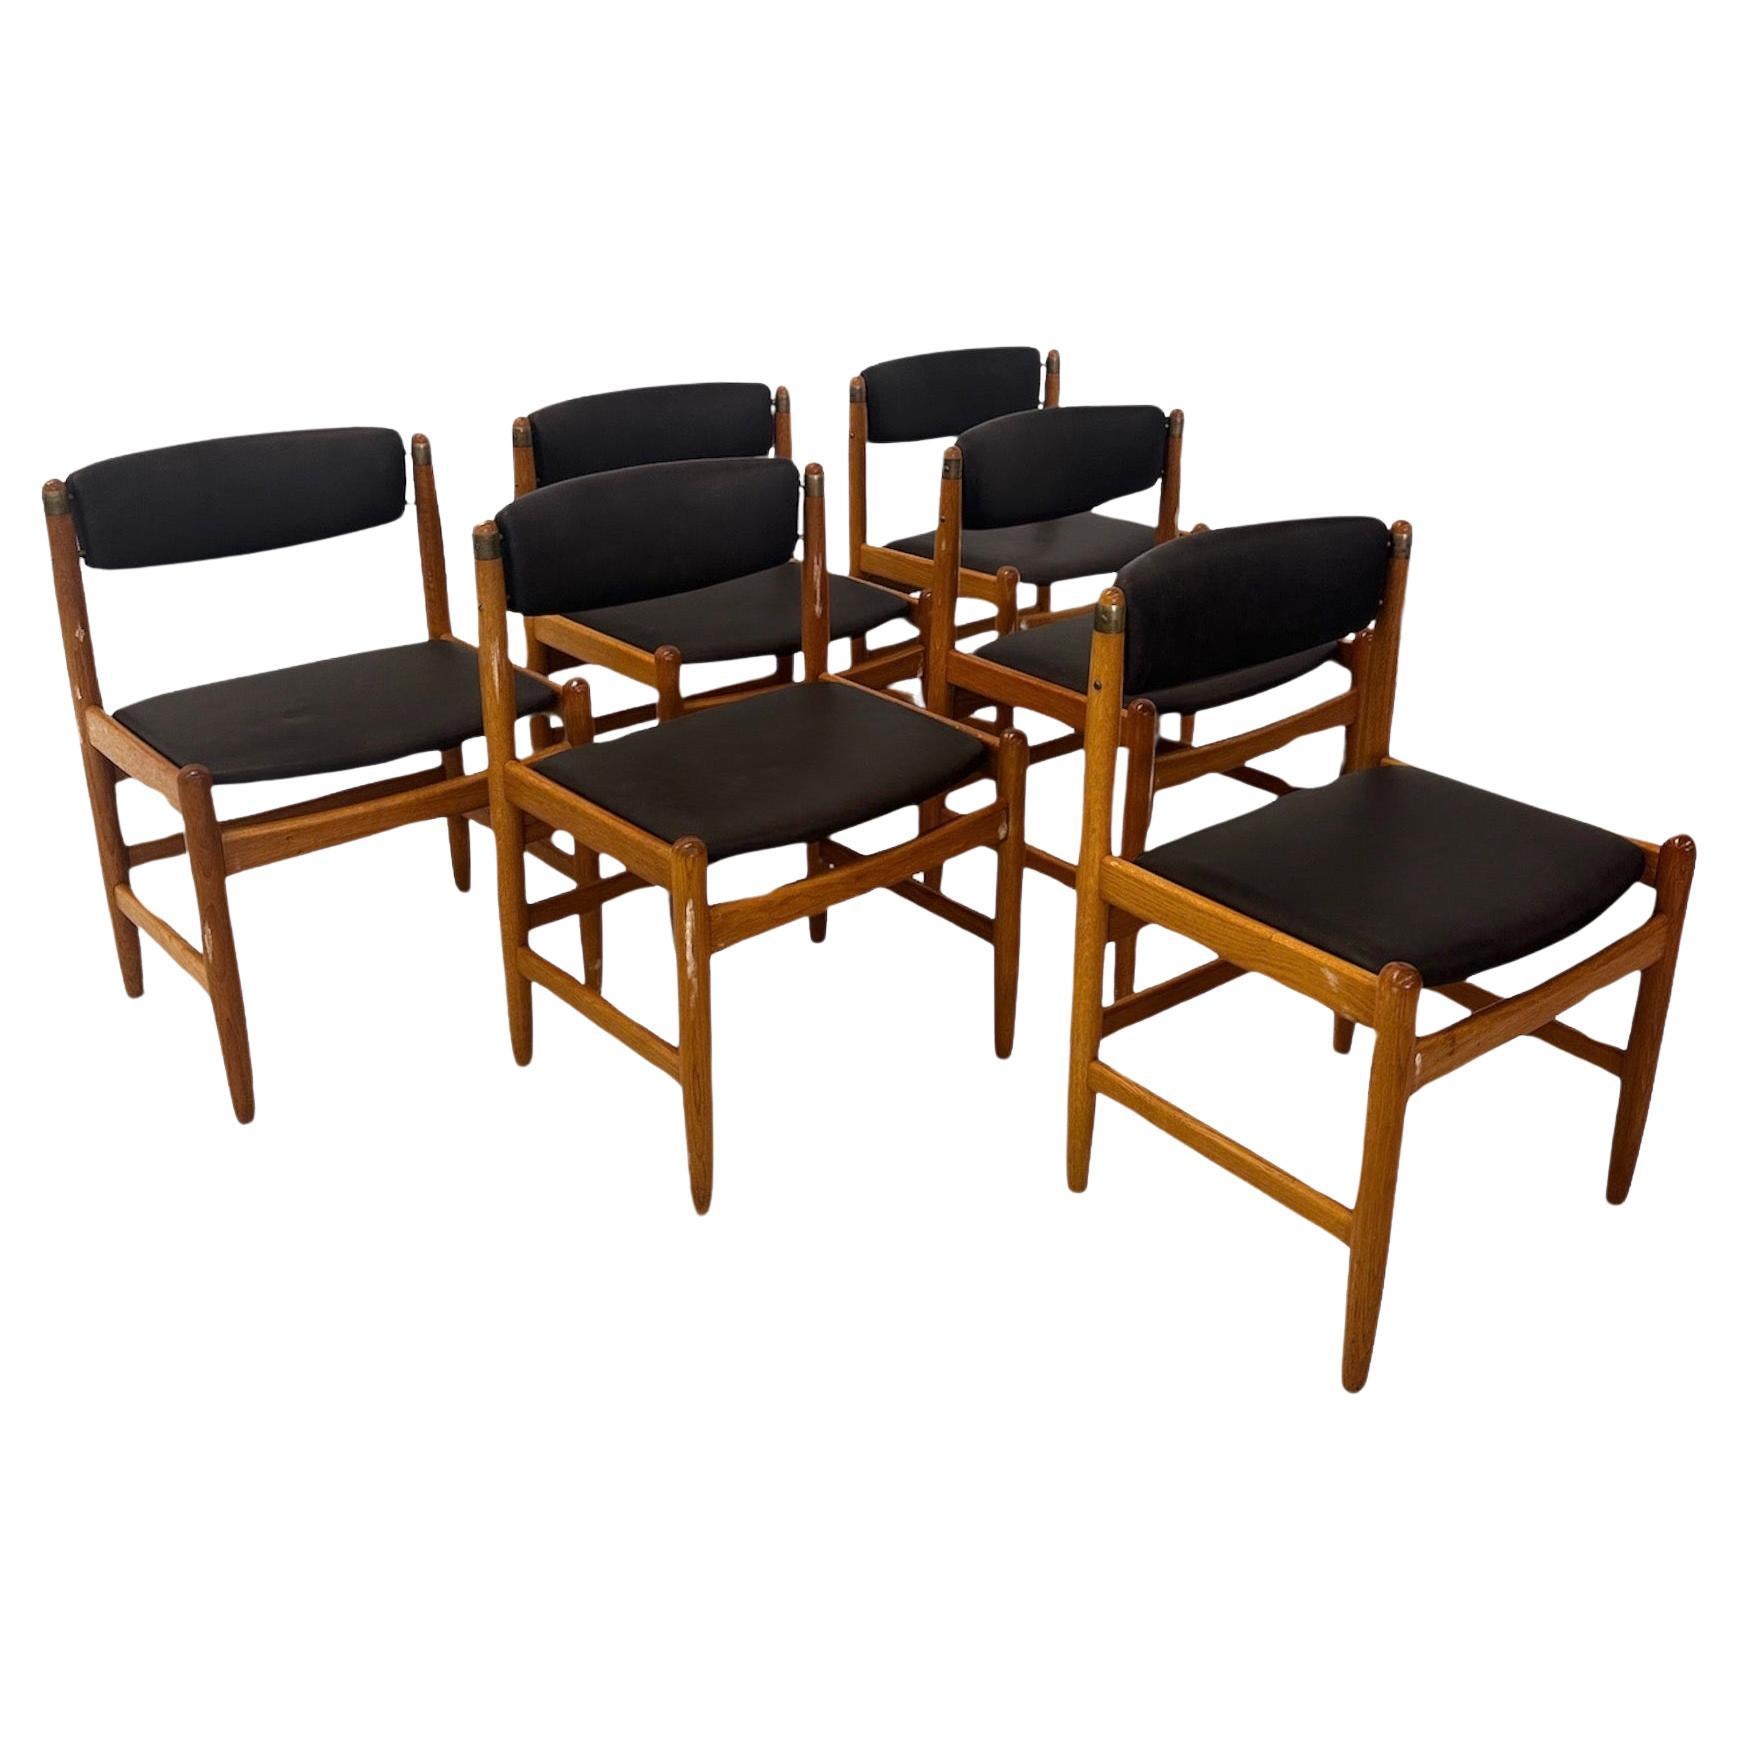 Set of 6 Oak Dining Chairs by Børge Mogensen for Karl Andersson & Söner, 1950s For Sale